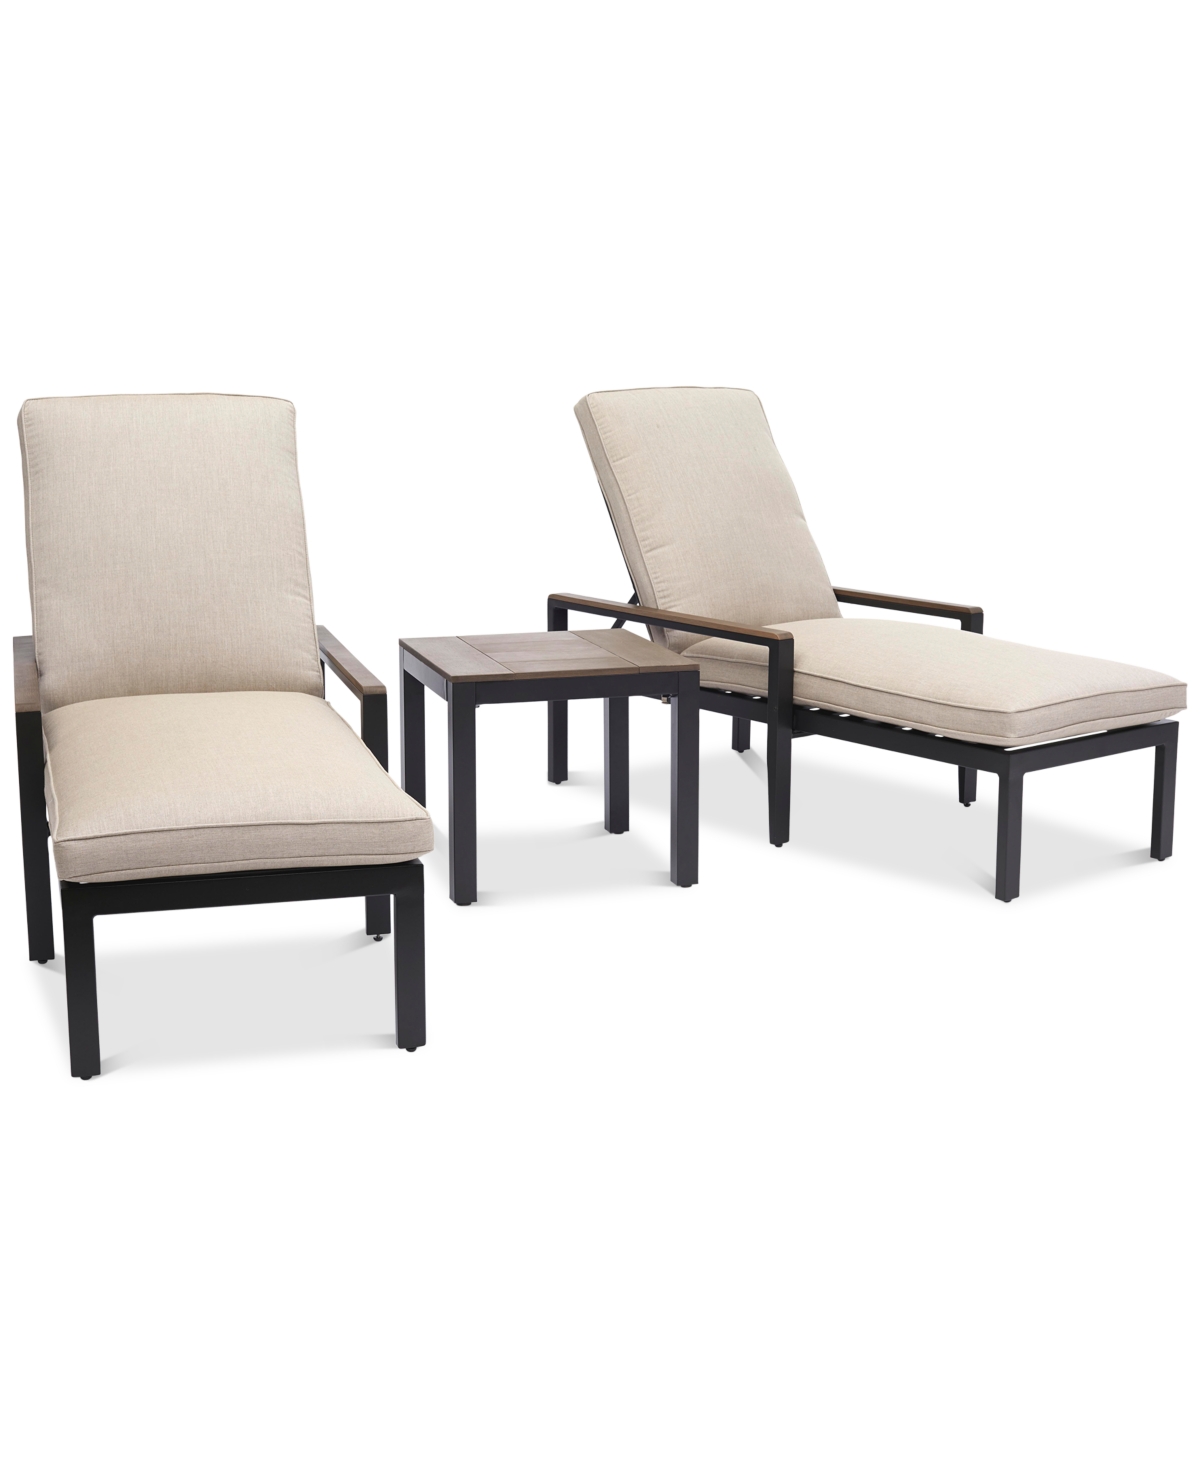 Stockholm Outdoor 3-Pc. Chaise Set (2 Chaise Lounge & End Table) with outdoor Cushions, Created for Macys